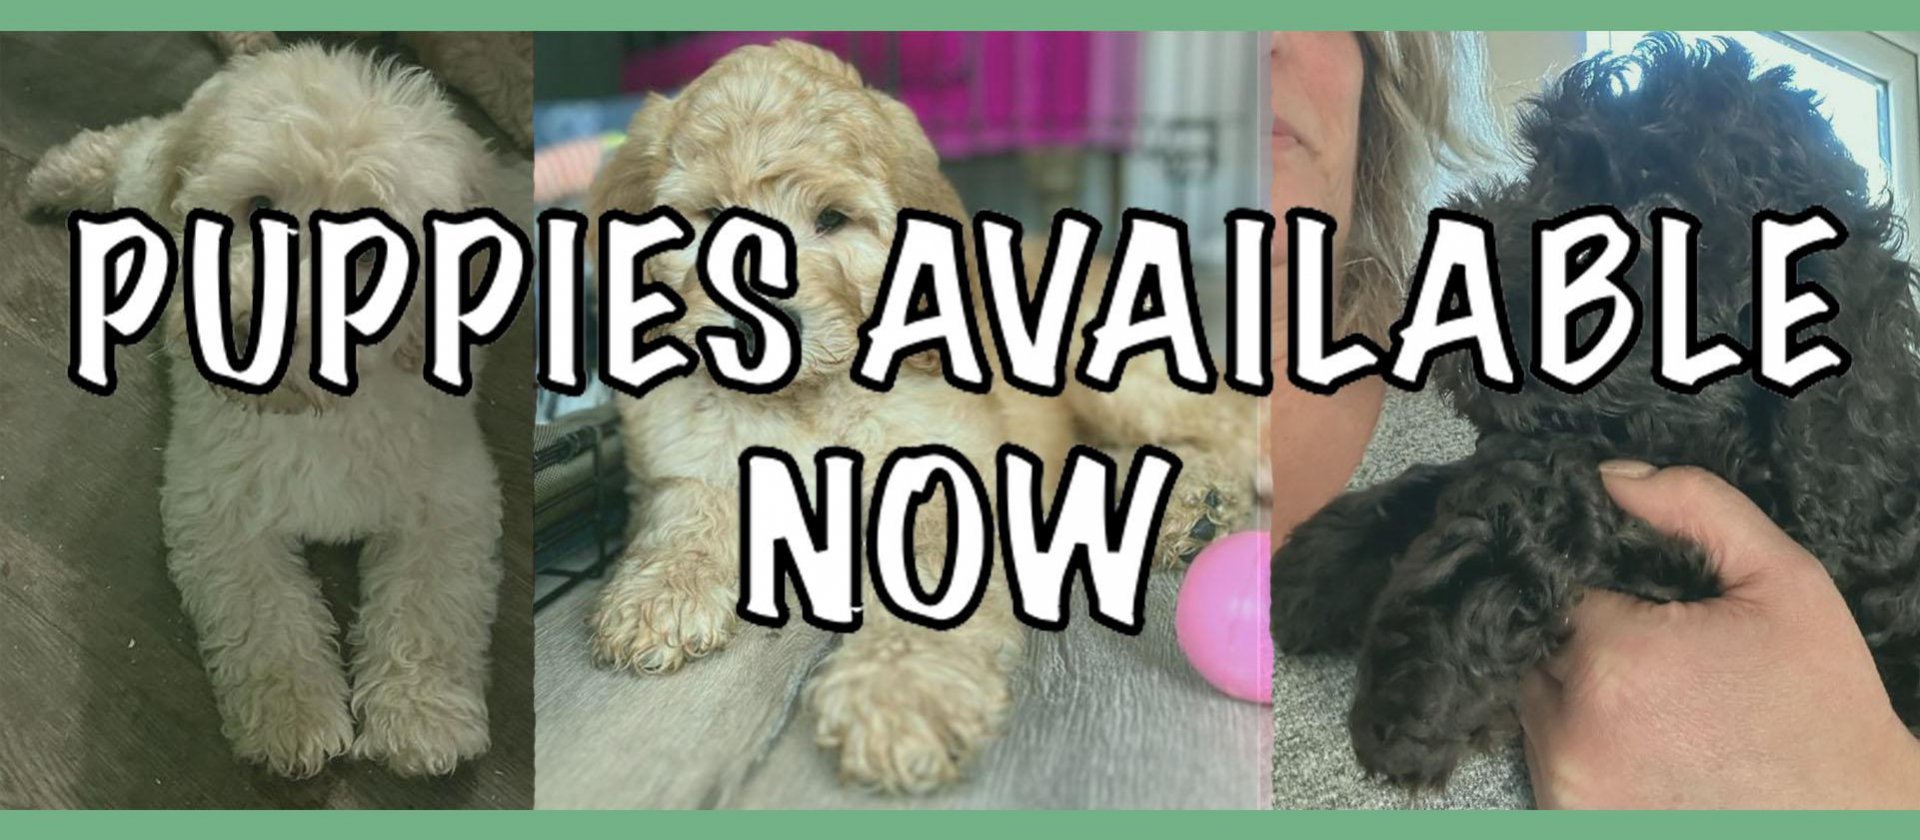 We have puppies available now